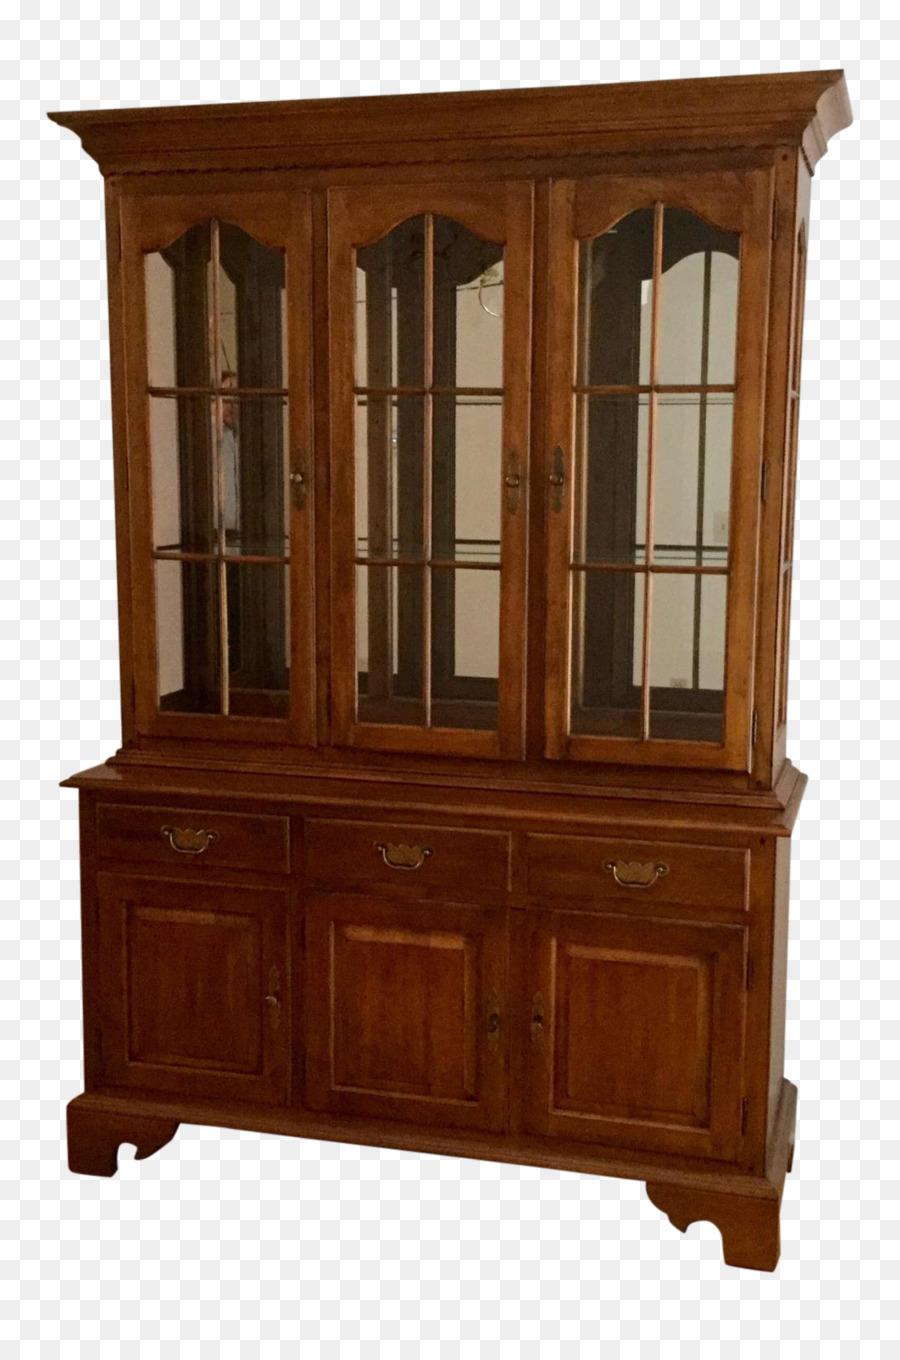 Huche，Armoire PNG